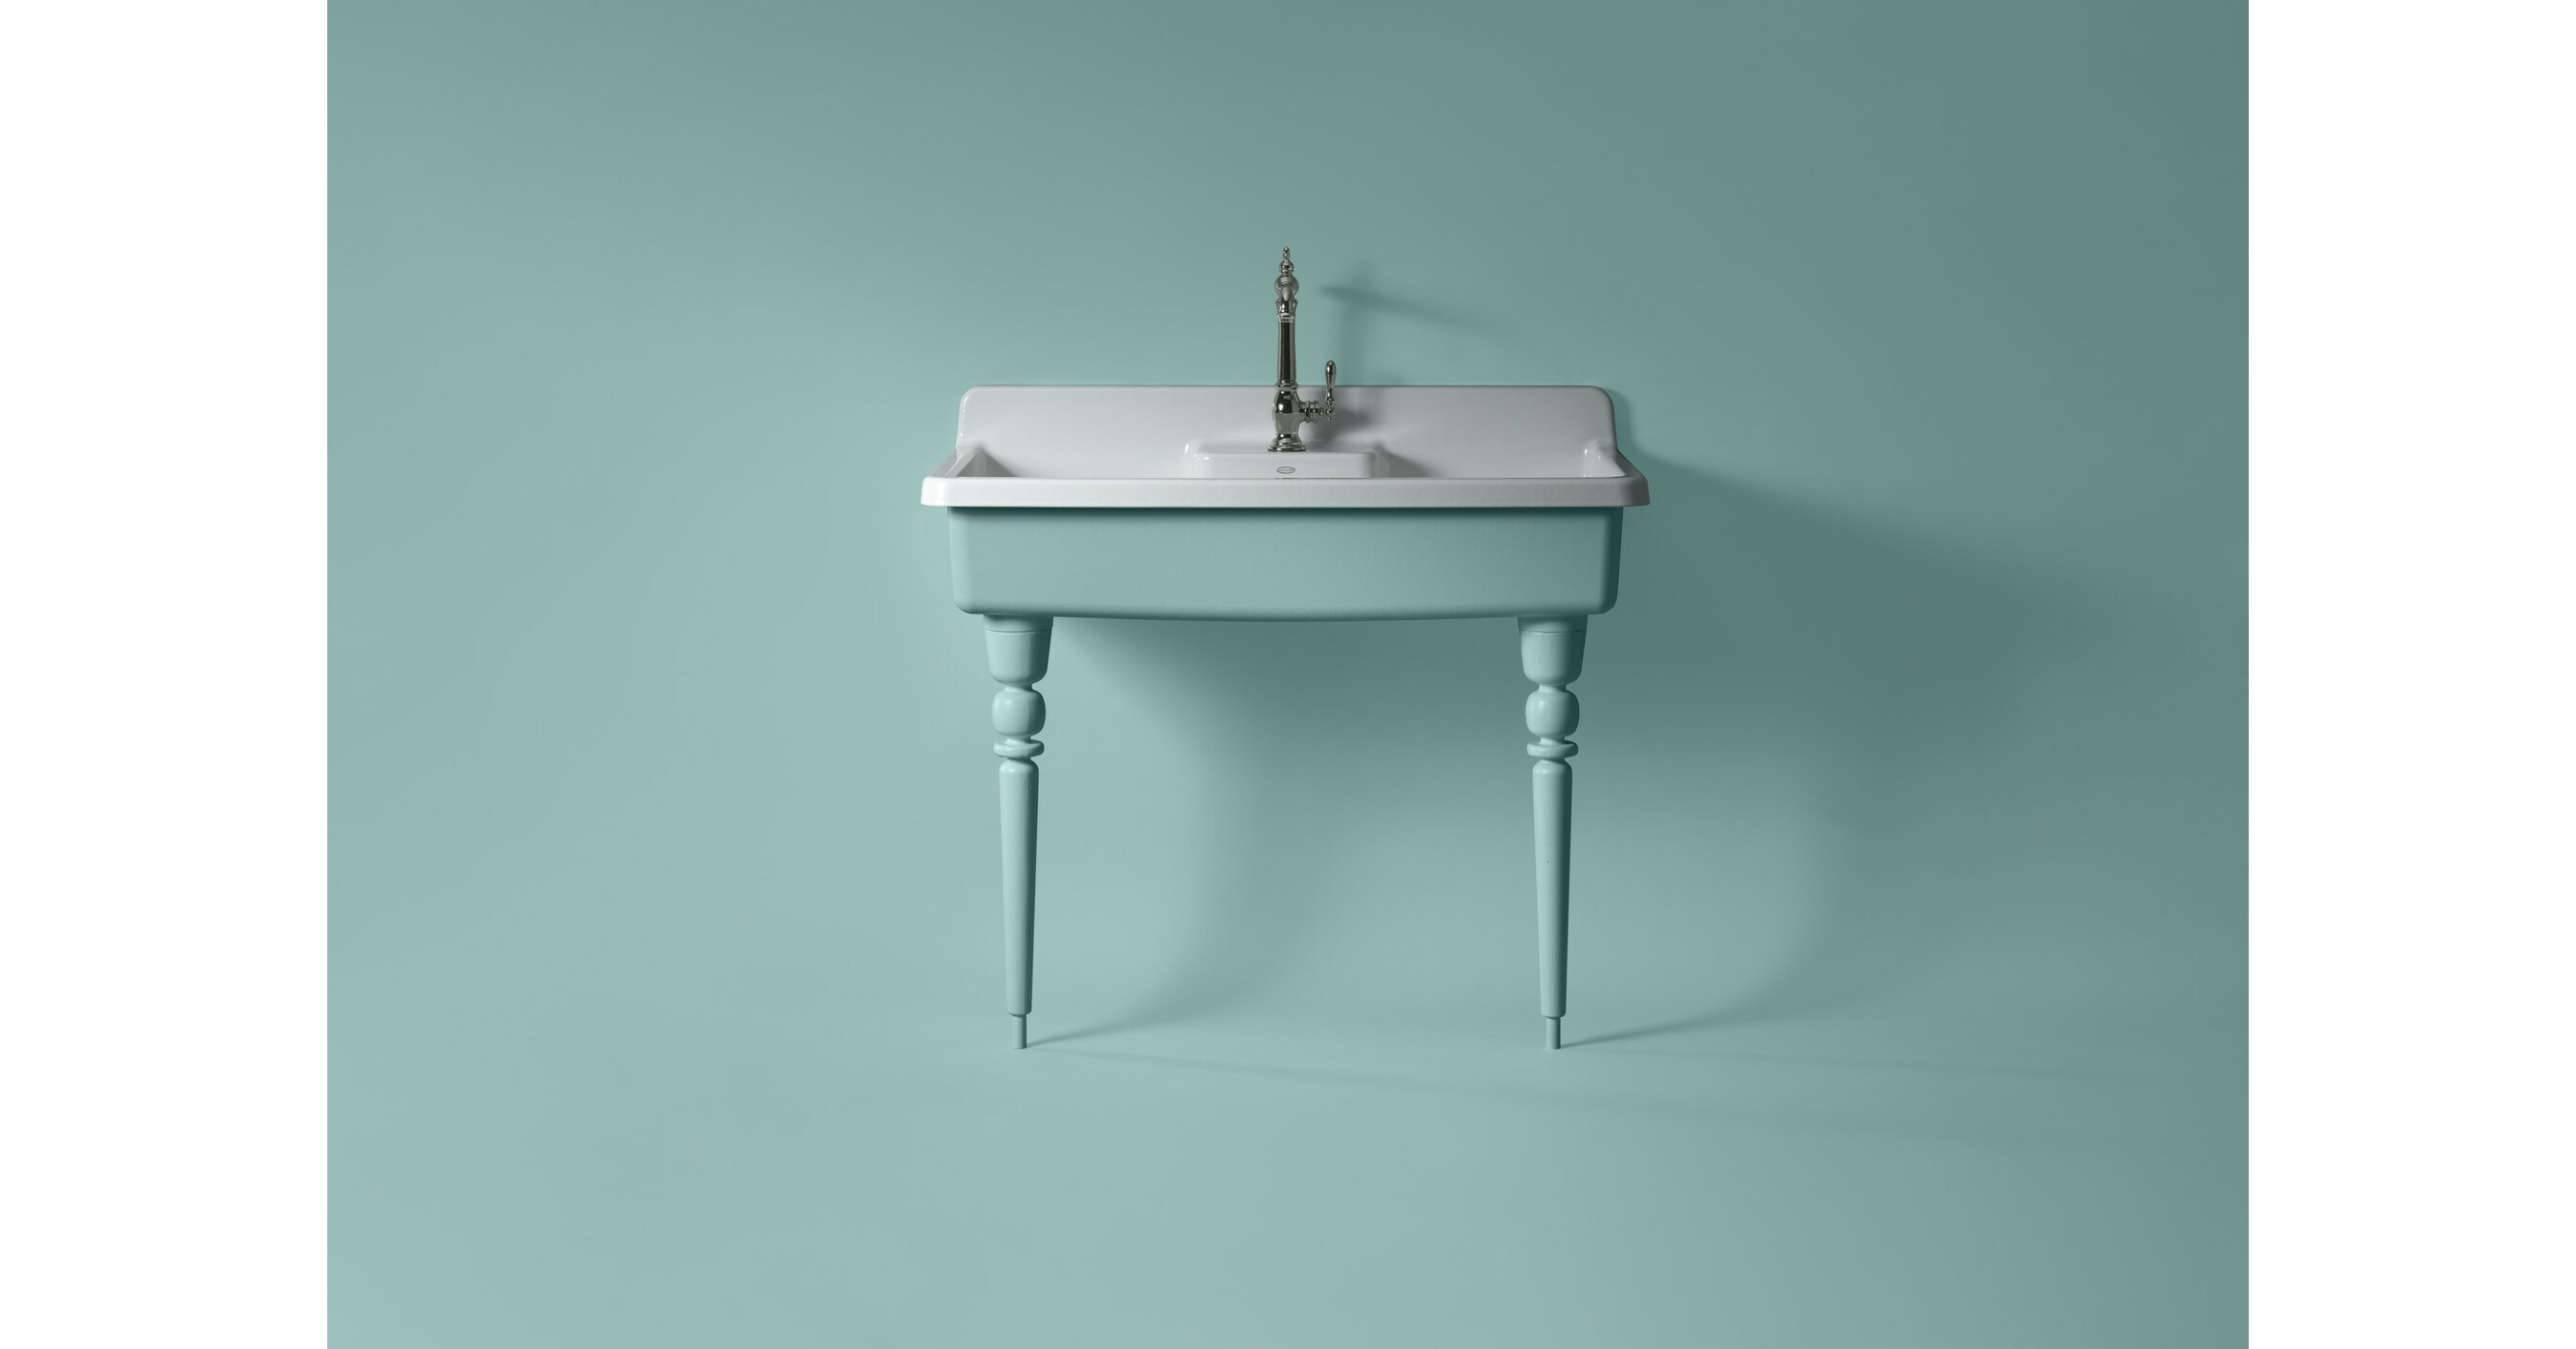 KOHLER HERITAGE COLORS REVEALS ITS TWO TOP SHADES AT KBIS 2023